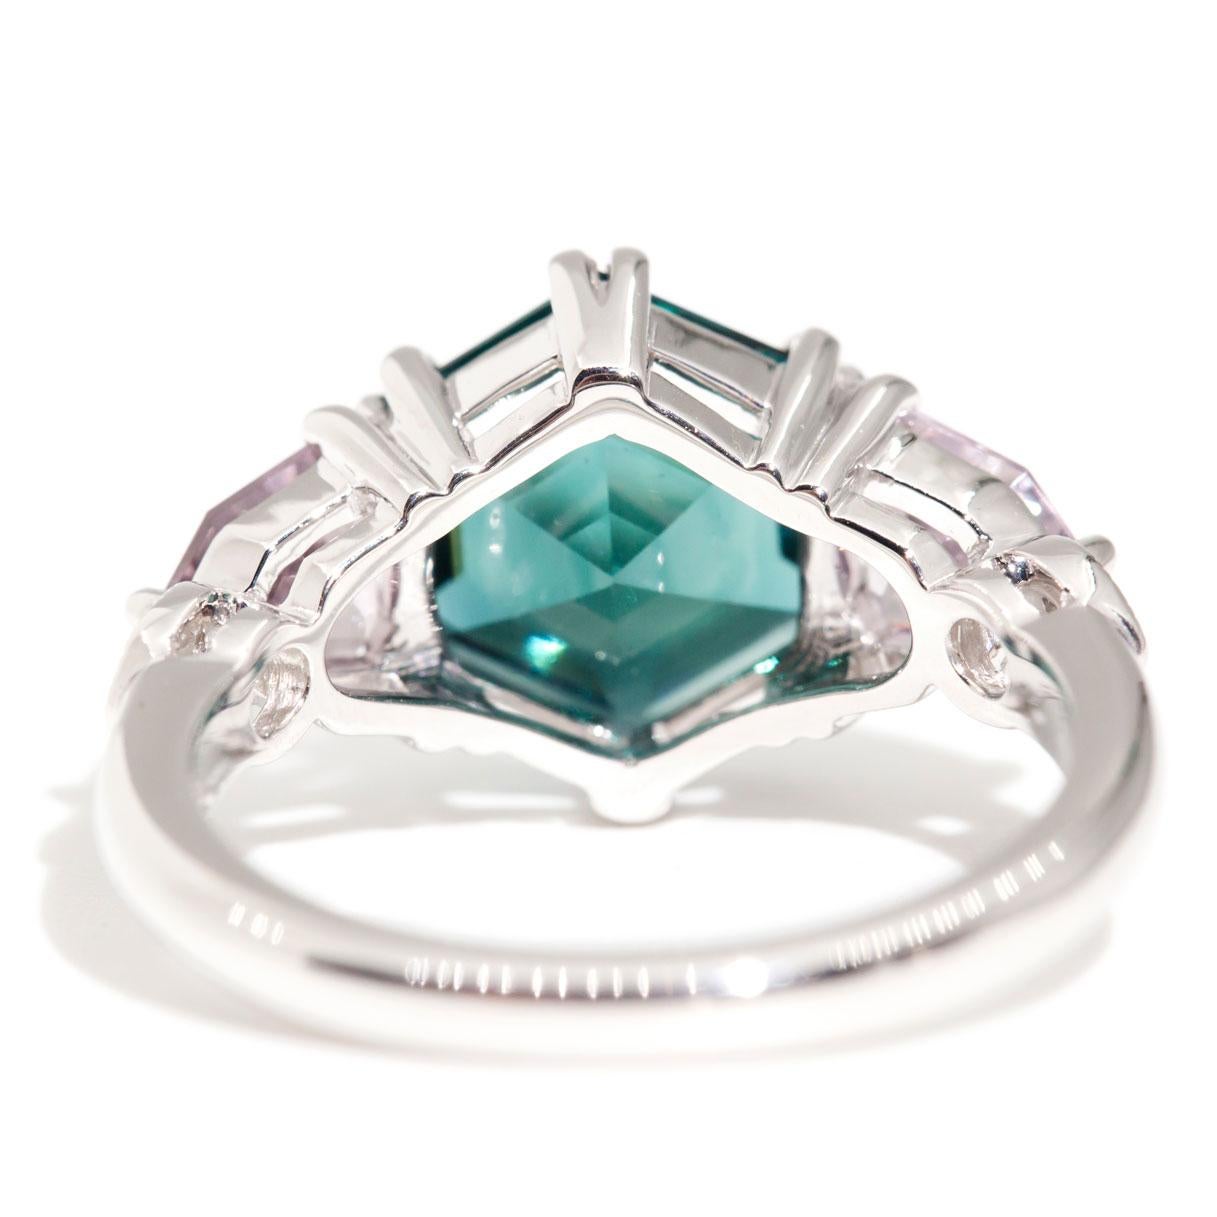 2.46 Carat Hexagon Teal Tourmaline and Spinel 18 Carat White Gold Cluster Ring 4